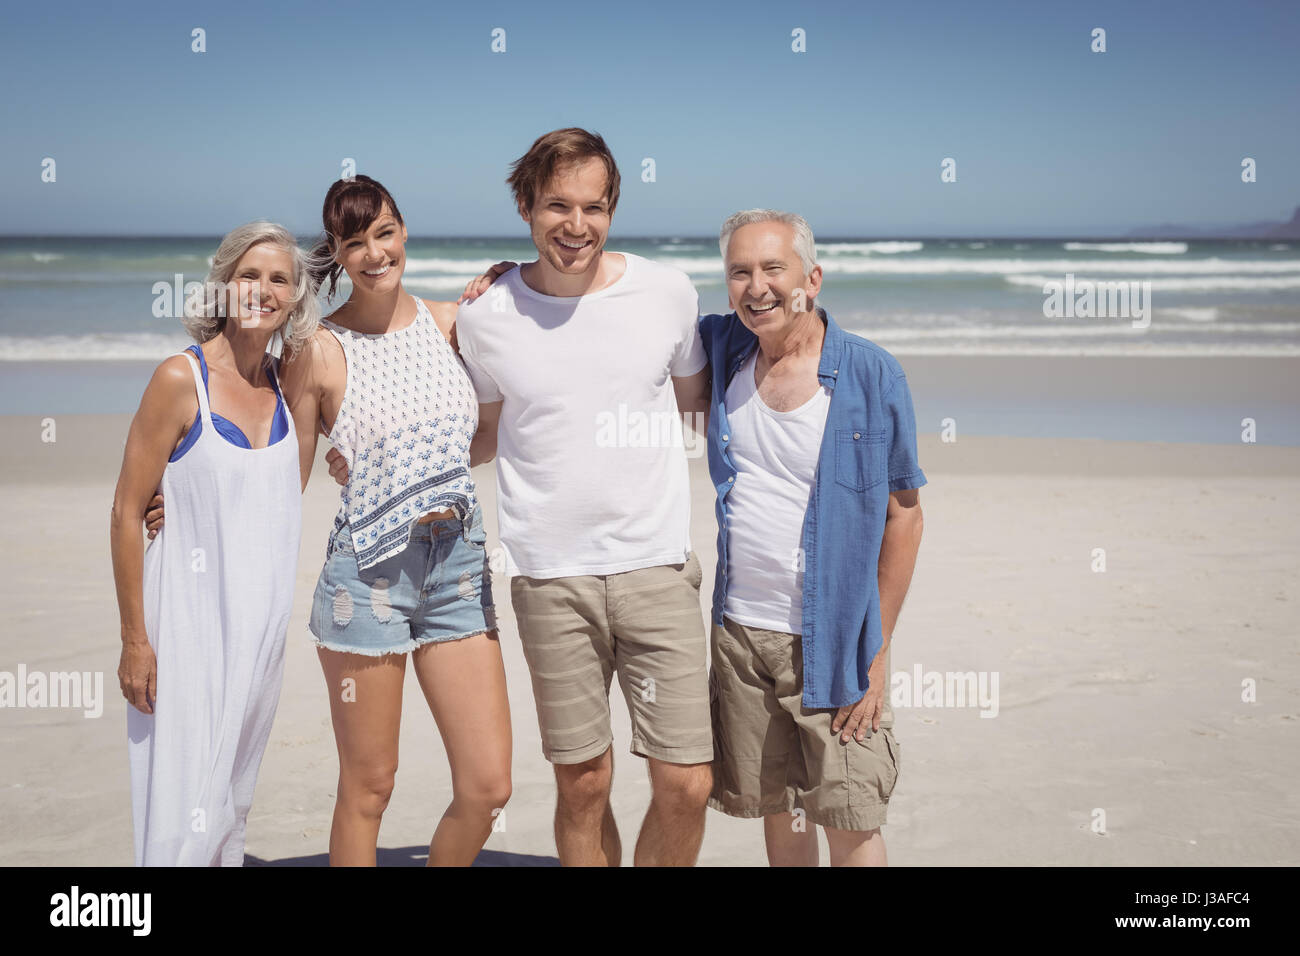 Portrait of happy family standing side by side at beach during sunny day Stock Photo